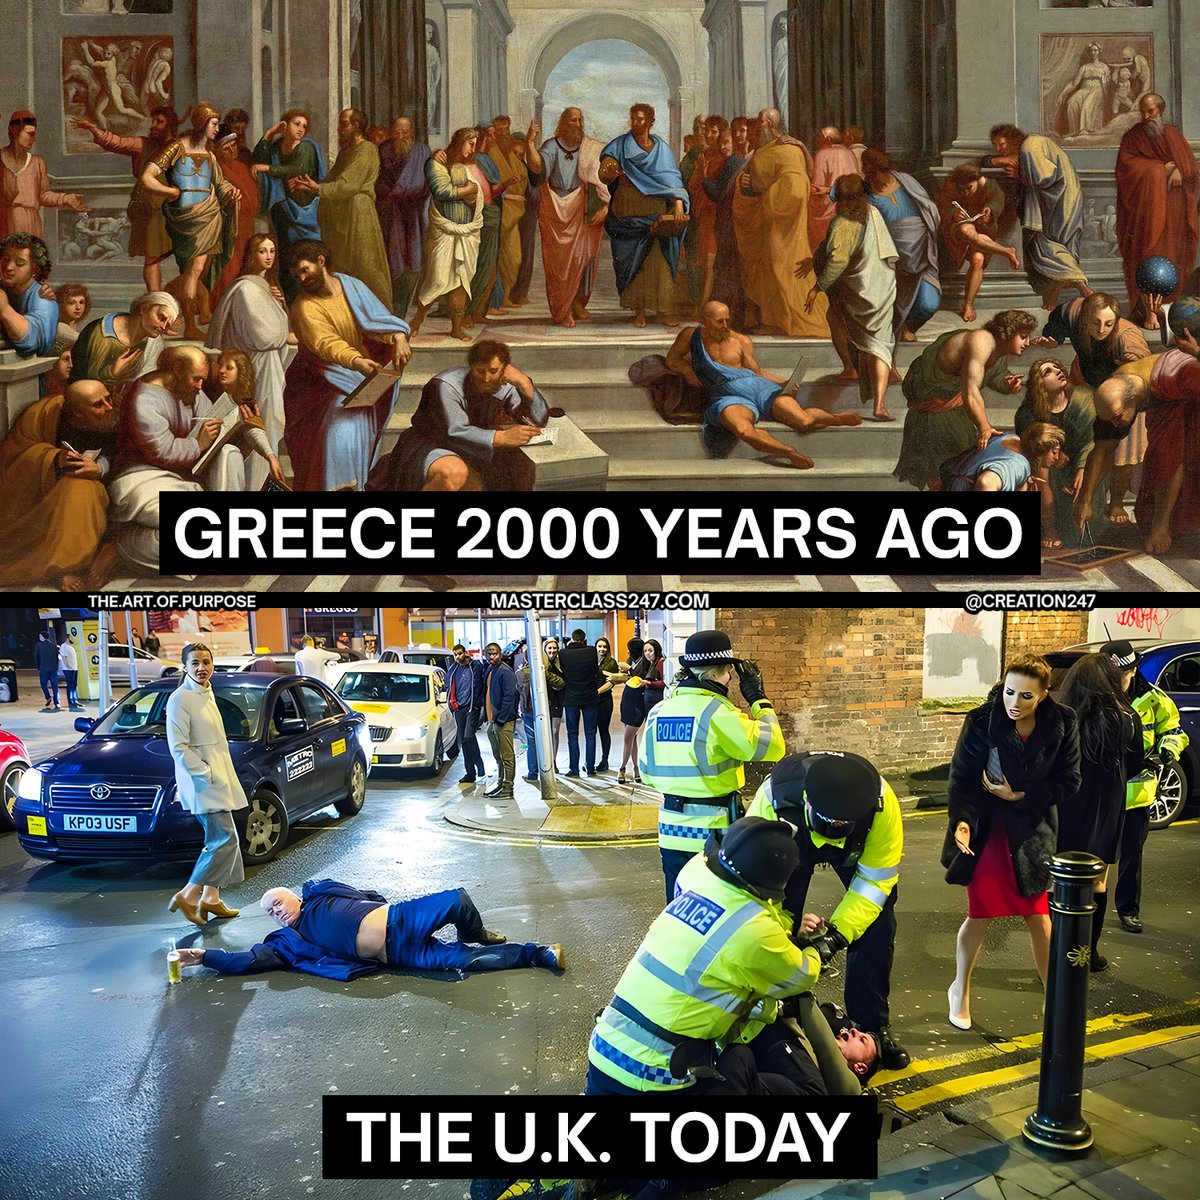 What happened to the UK?